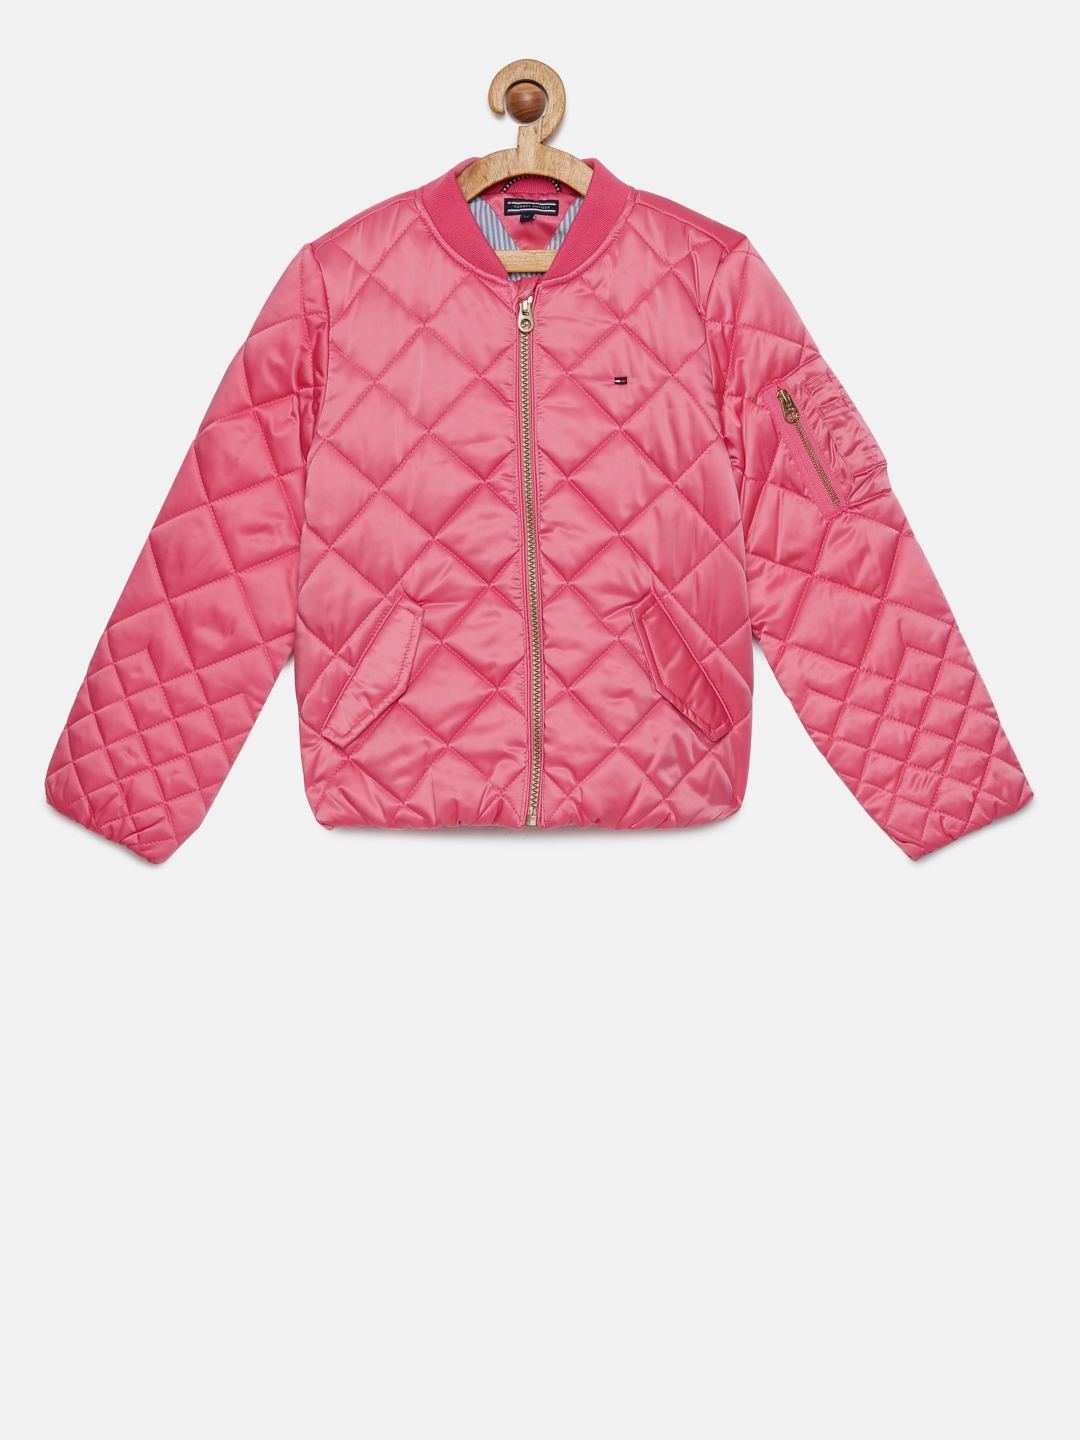 Buy Tommy Hilfiger Girls Pink Solid Quilted Jacket - Jackets for Girls ...